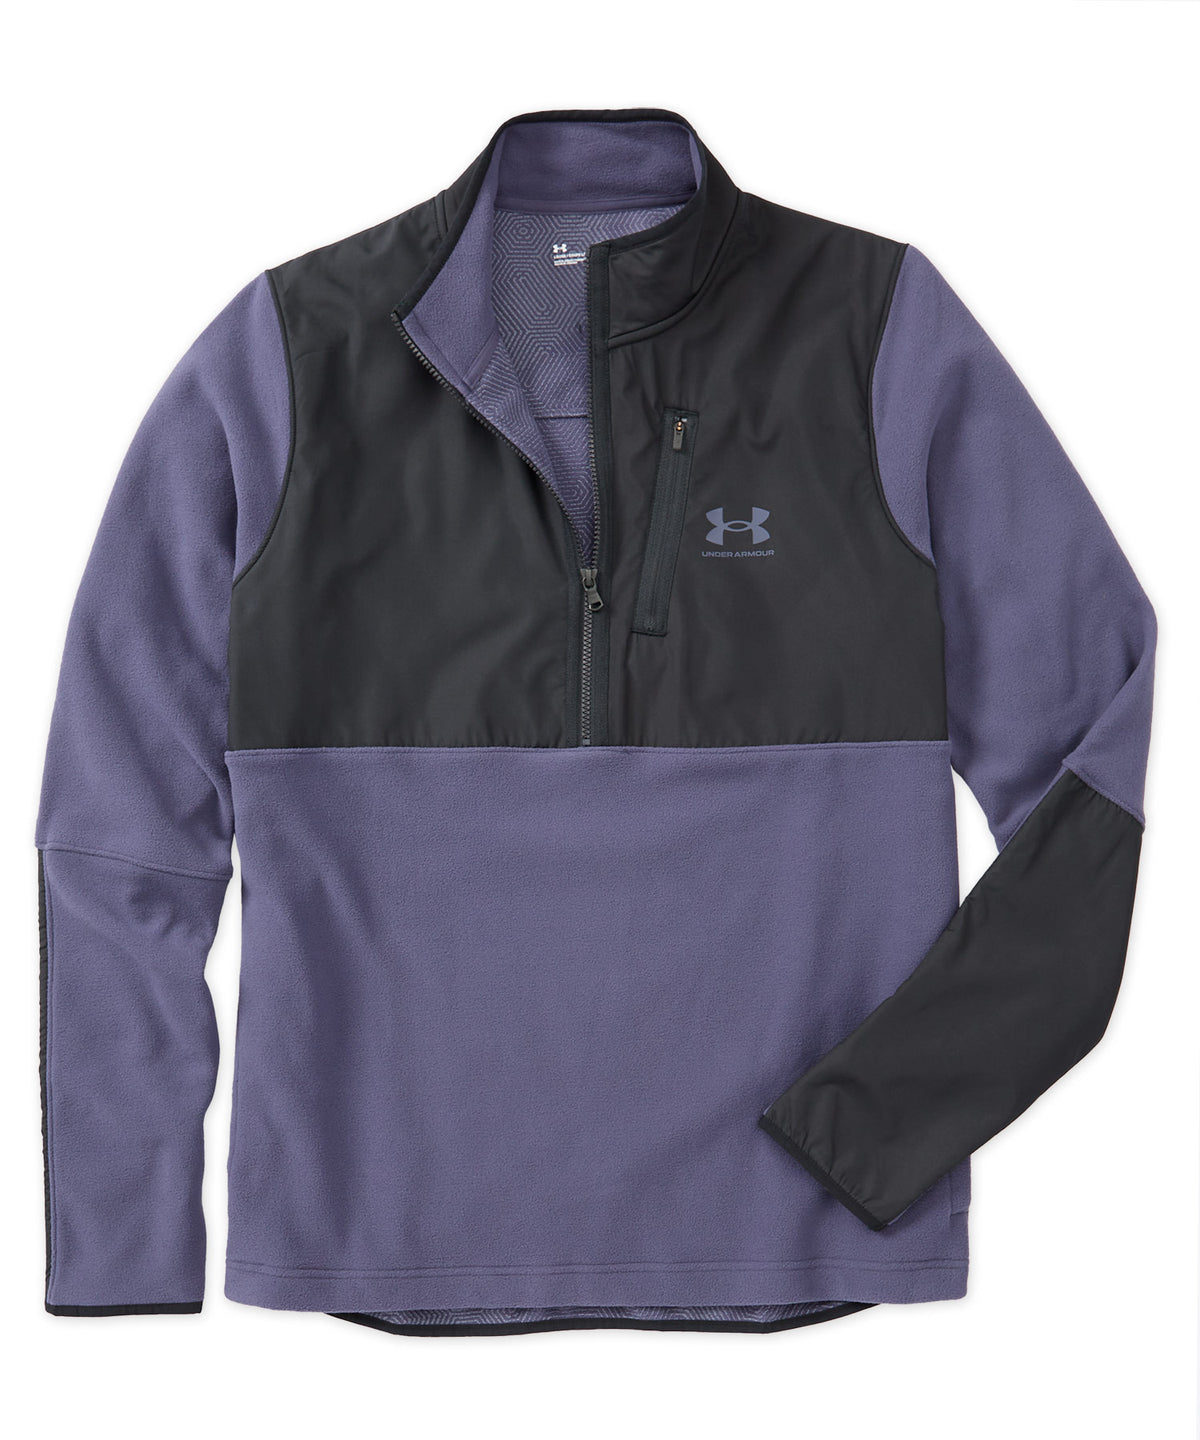 Under Armour Cold Gear Infrared Half-Zip Pullover, Big & Tall